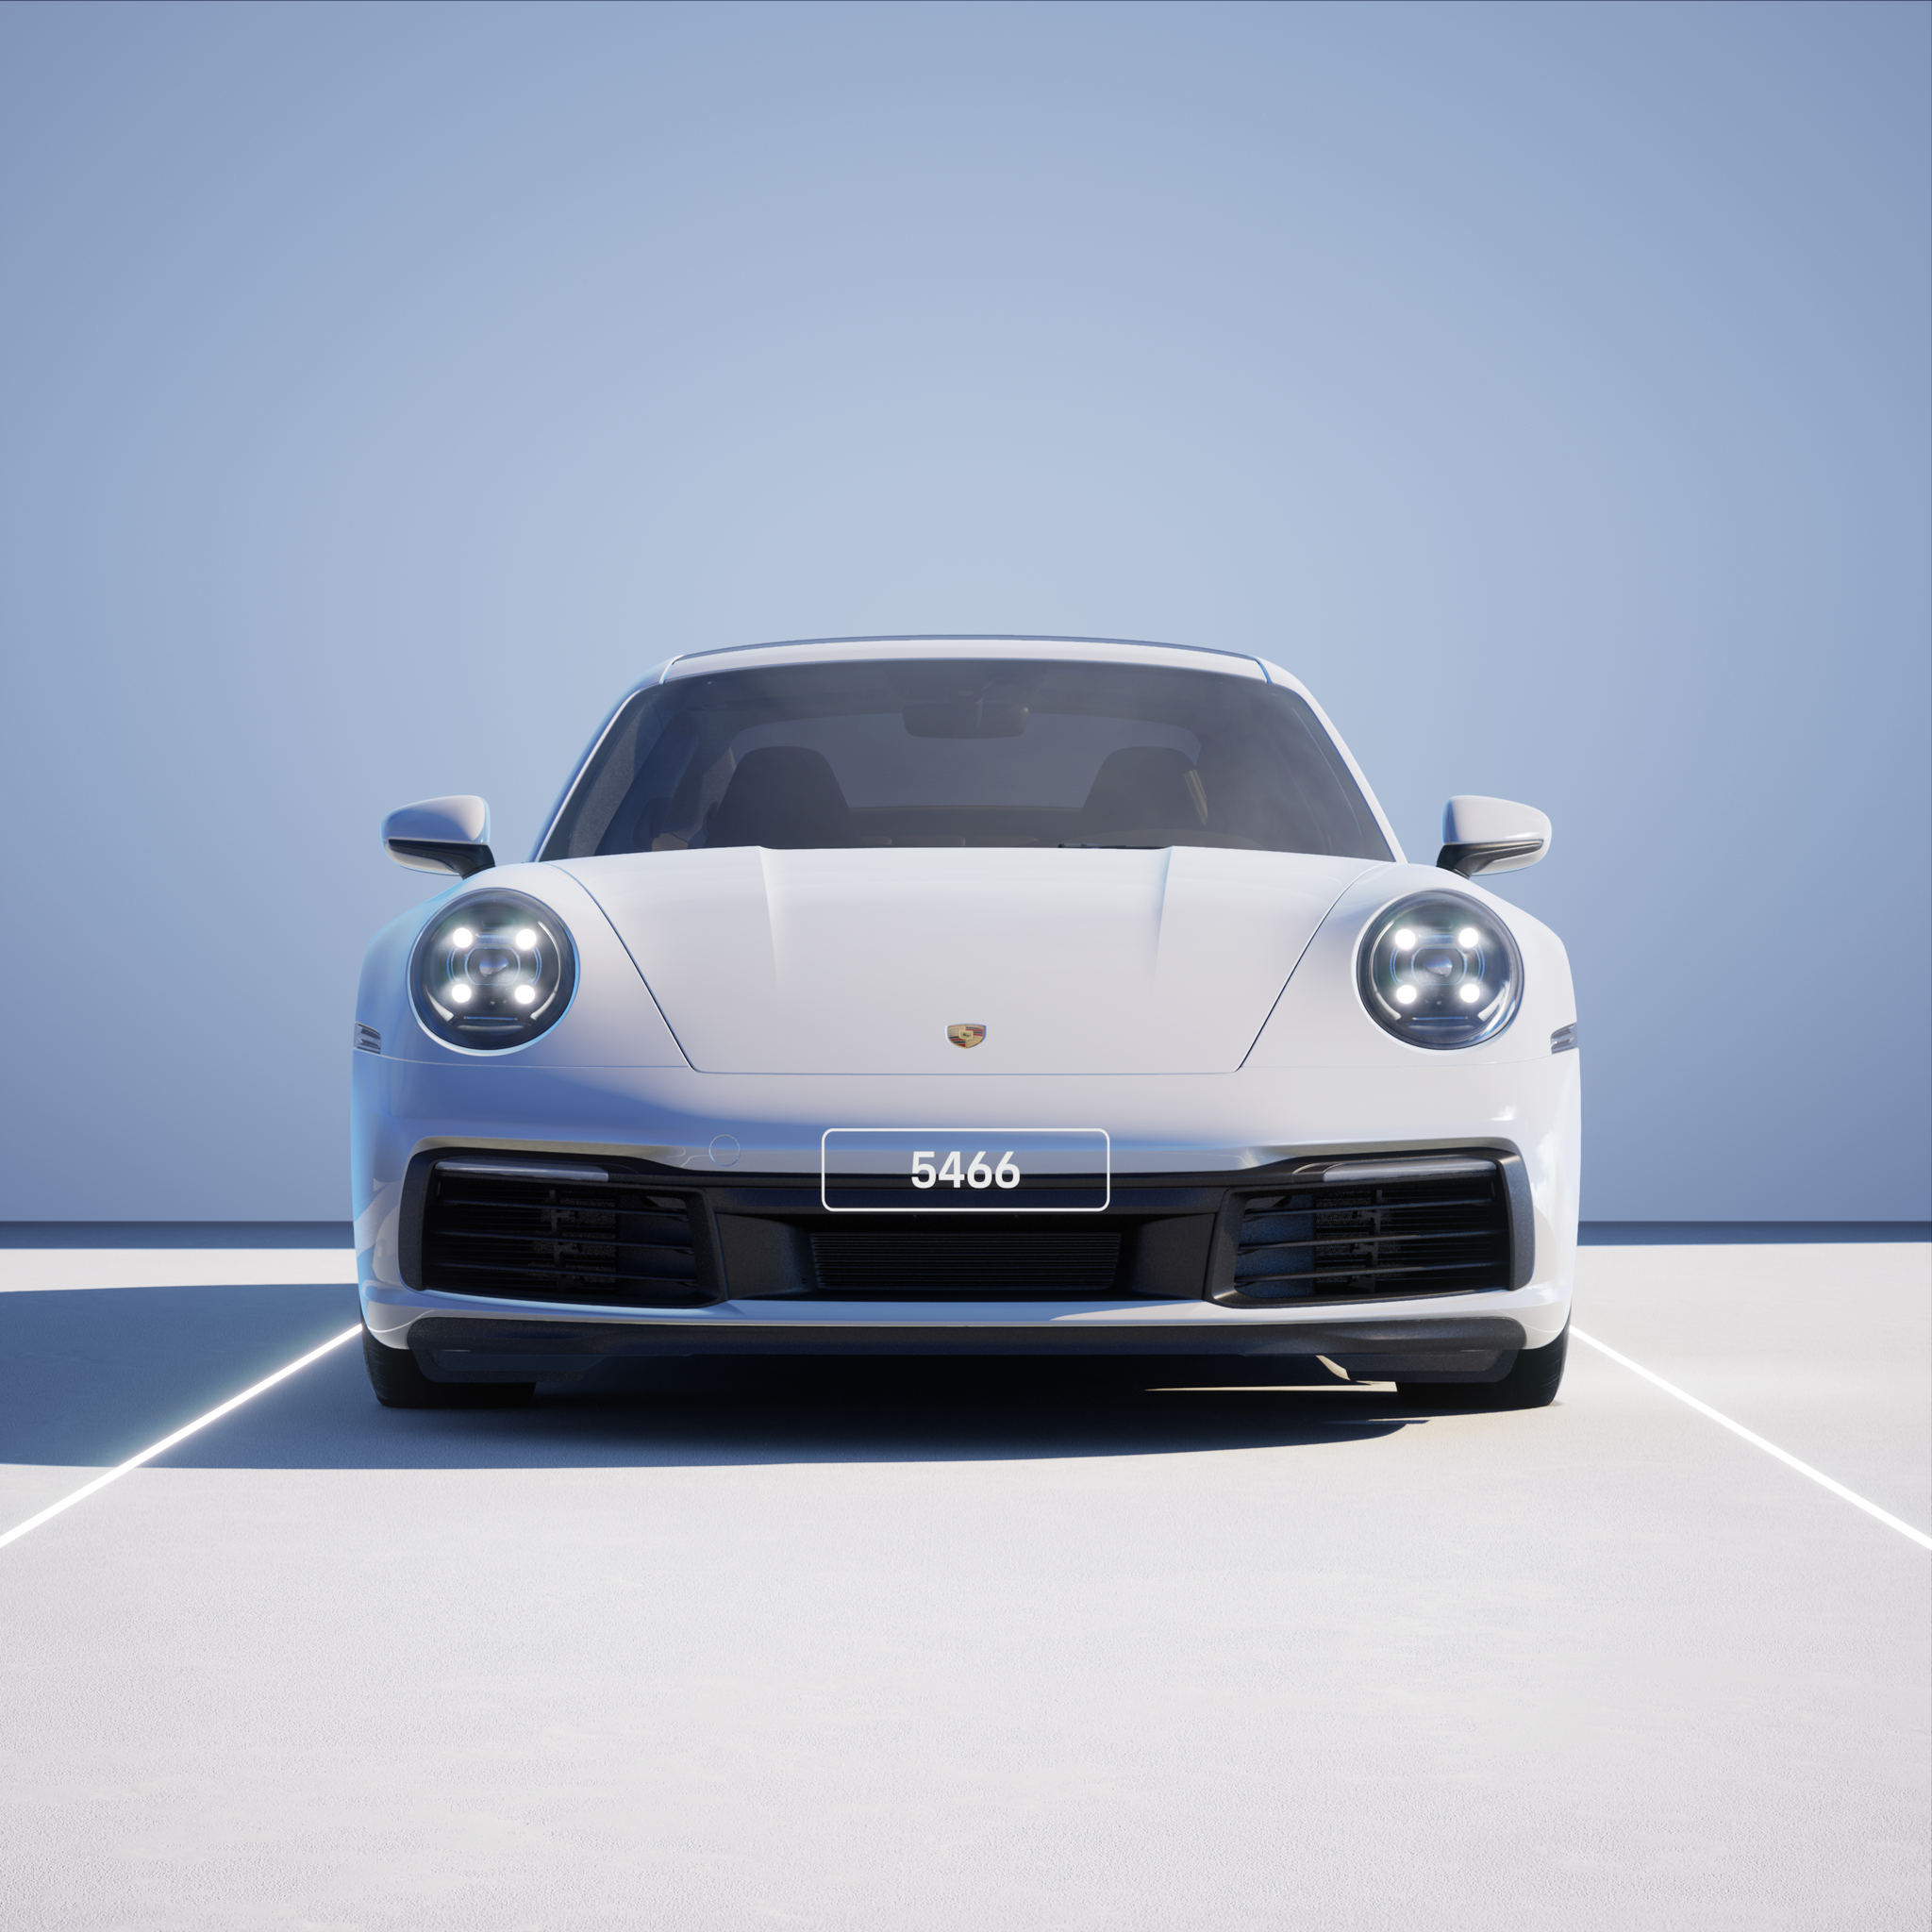 The PORSCHΞ 911 5466 image in phase